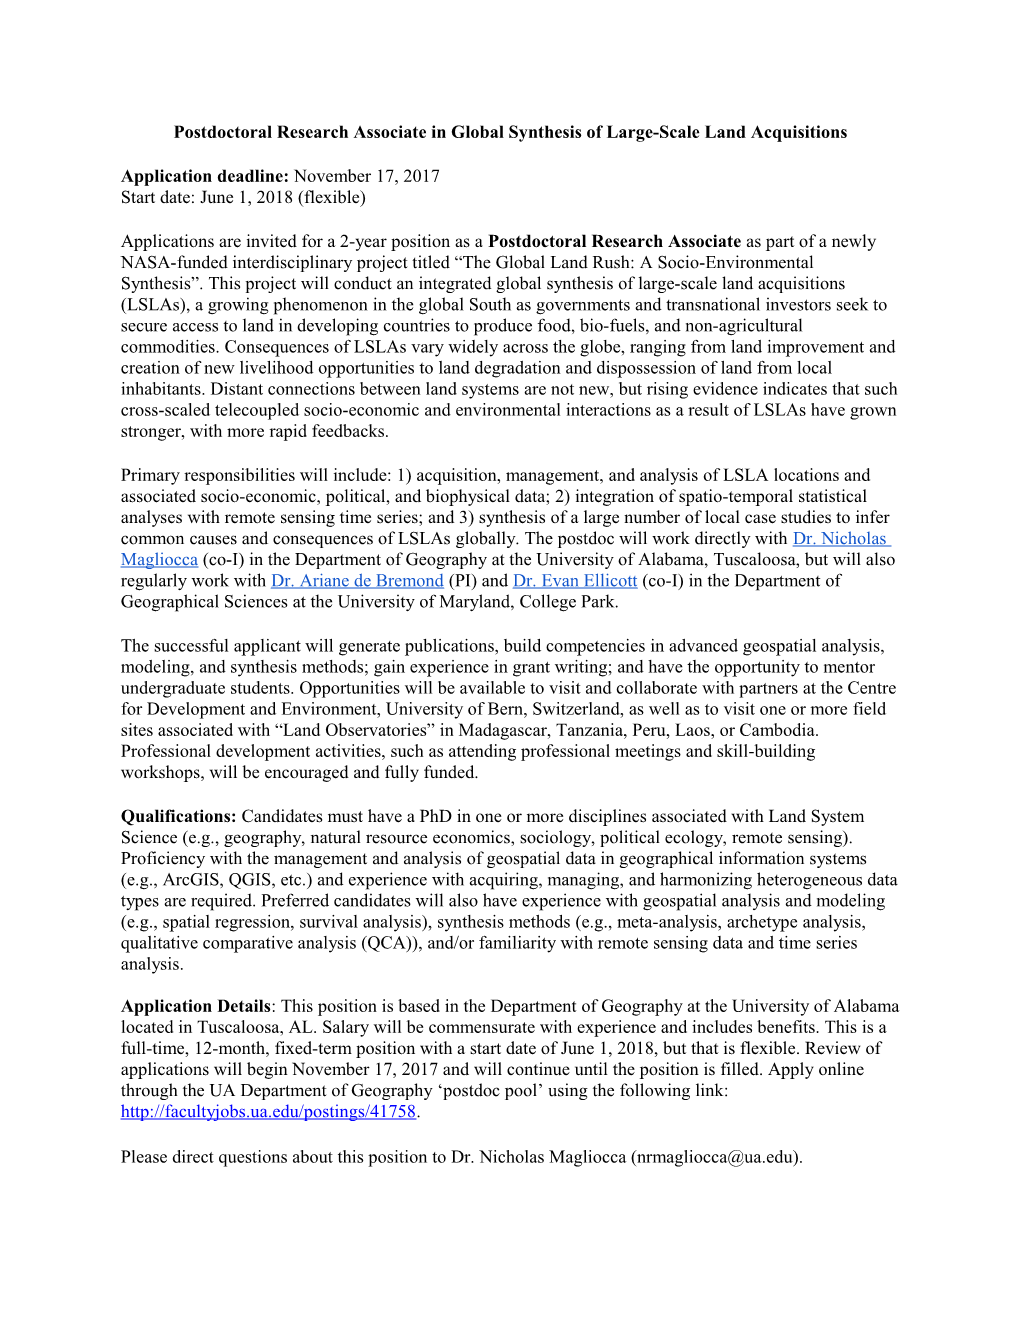 Postdoctoral Research Associate in Global Synthesis of Large-Scale Land Acquisitions